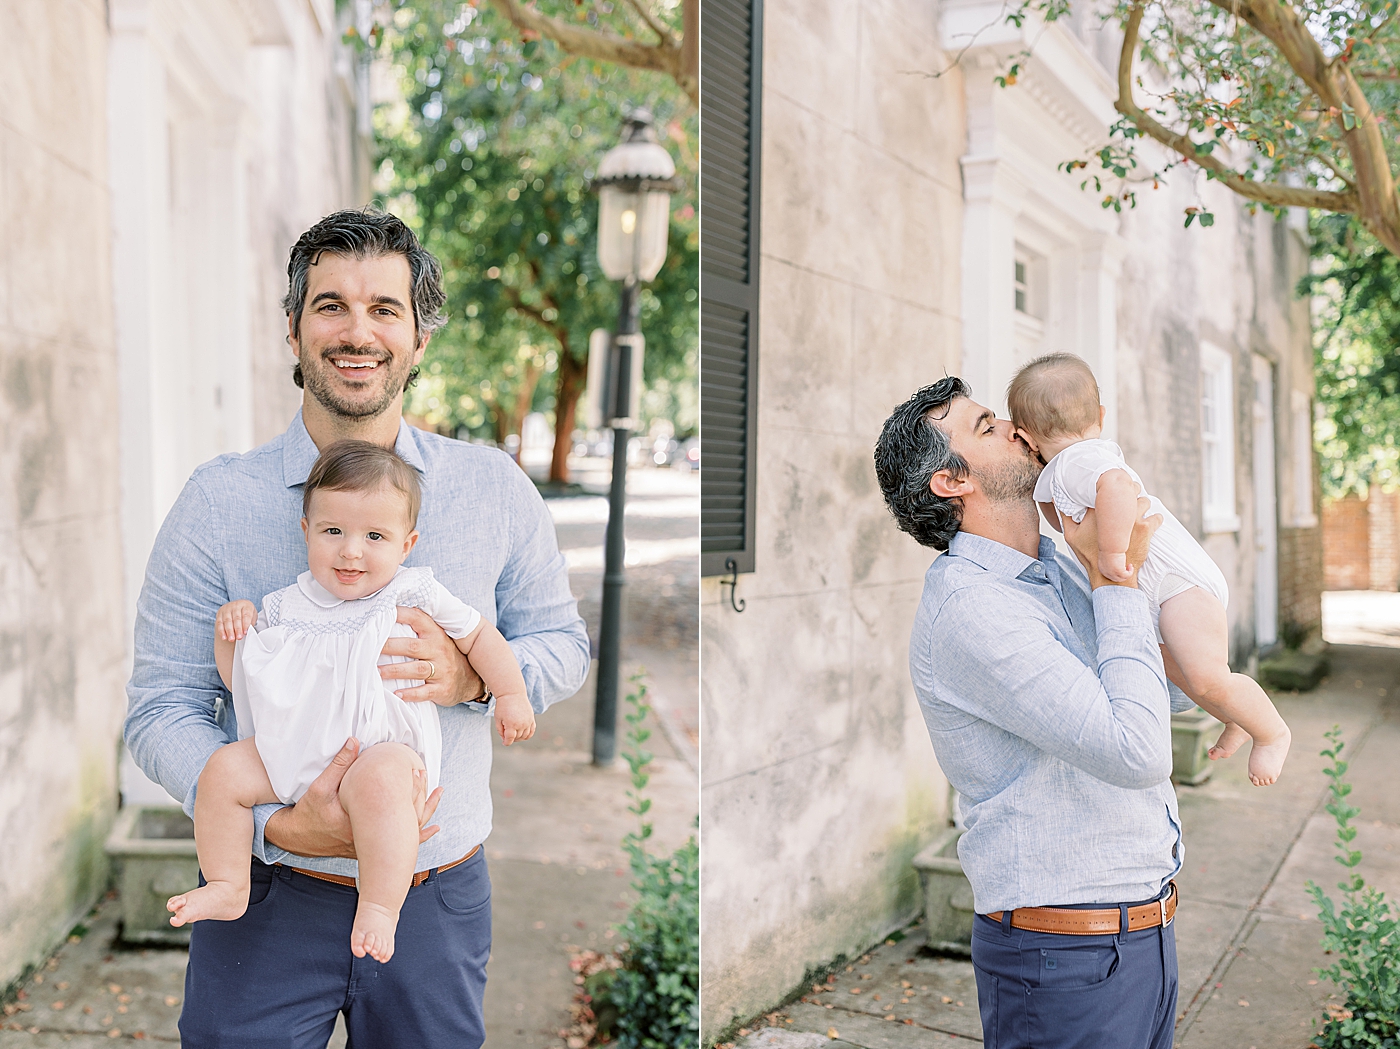 Side-by-side images of dad holding and kissing baby | Images by Caitlyn Motycka